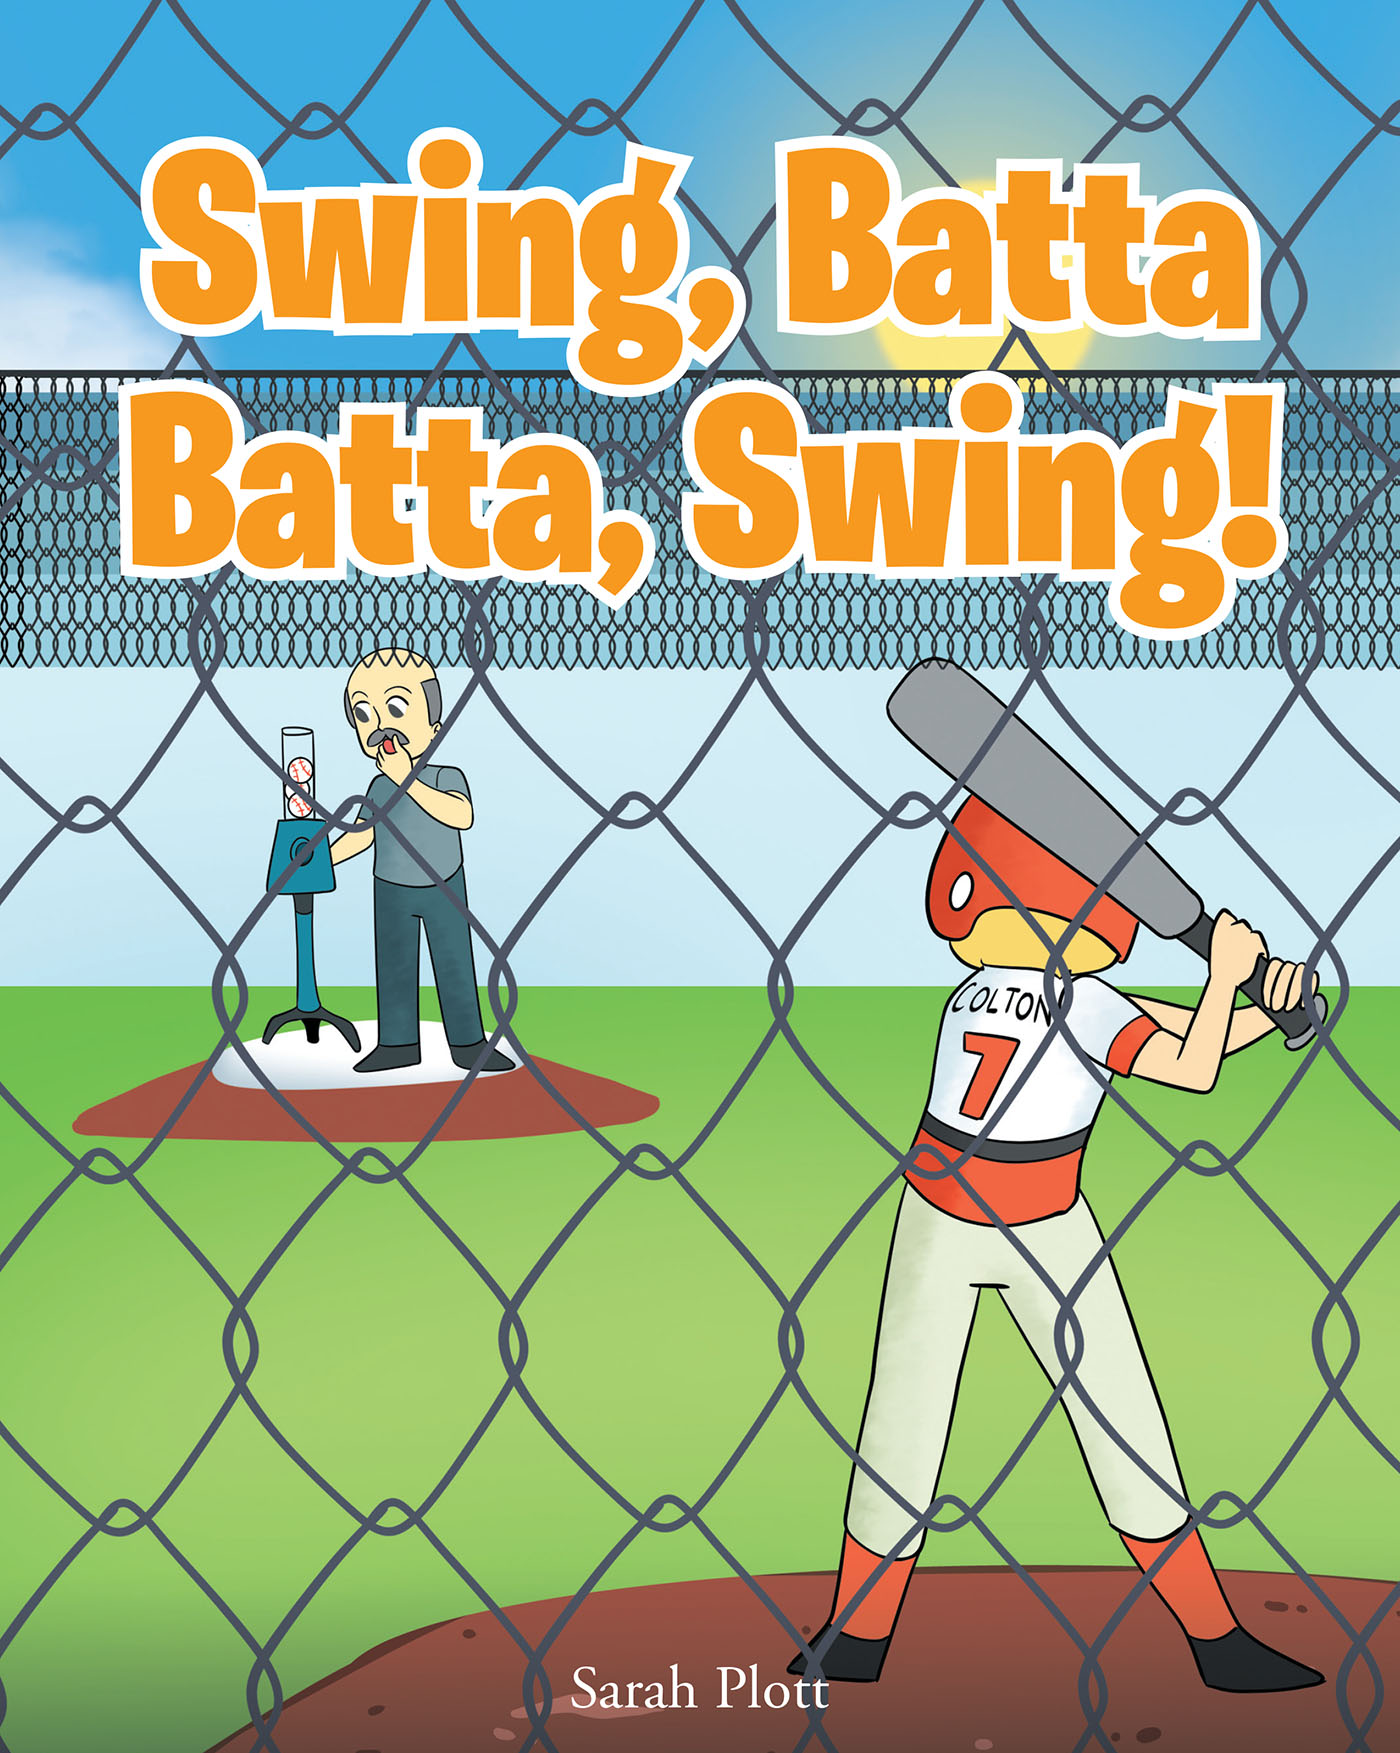 Sarah Plott’s Newly Released "Swing, Batta Batta, Swing!" is a Heartwarming Story of Staying True to One’s Passions and Overcoming Doubt